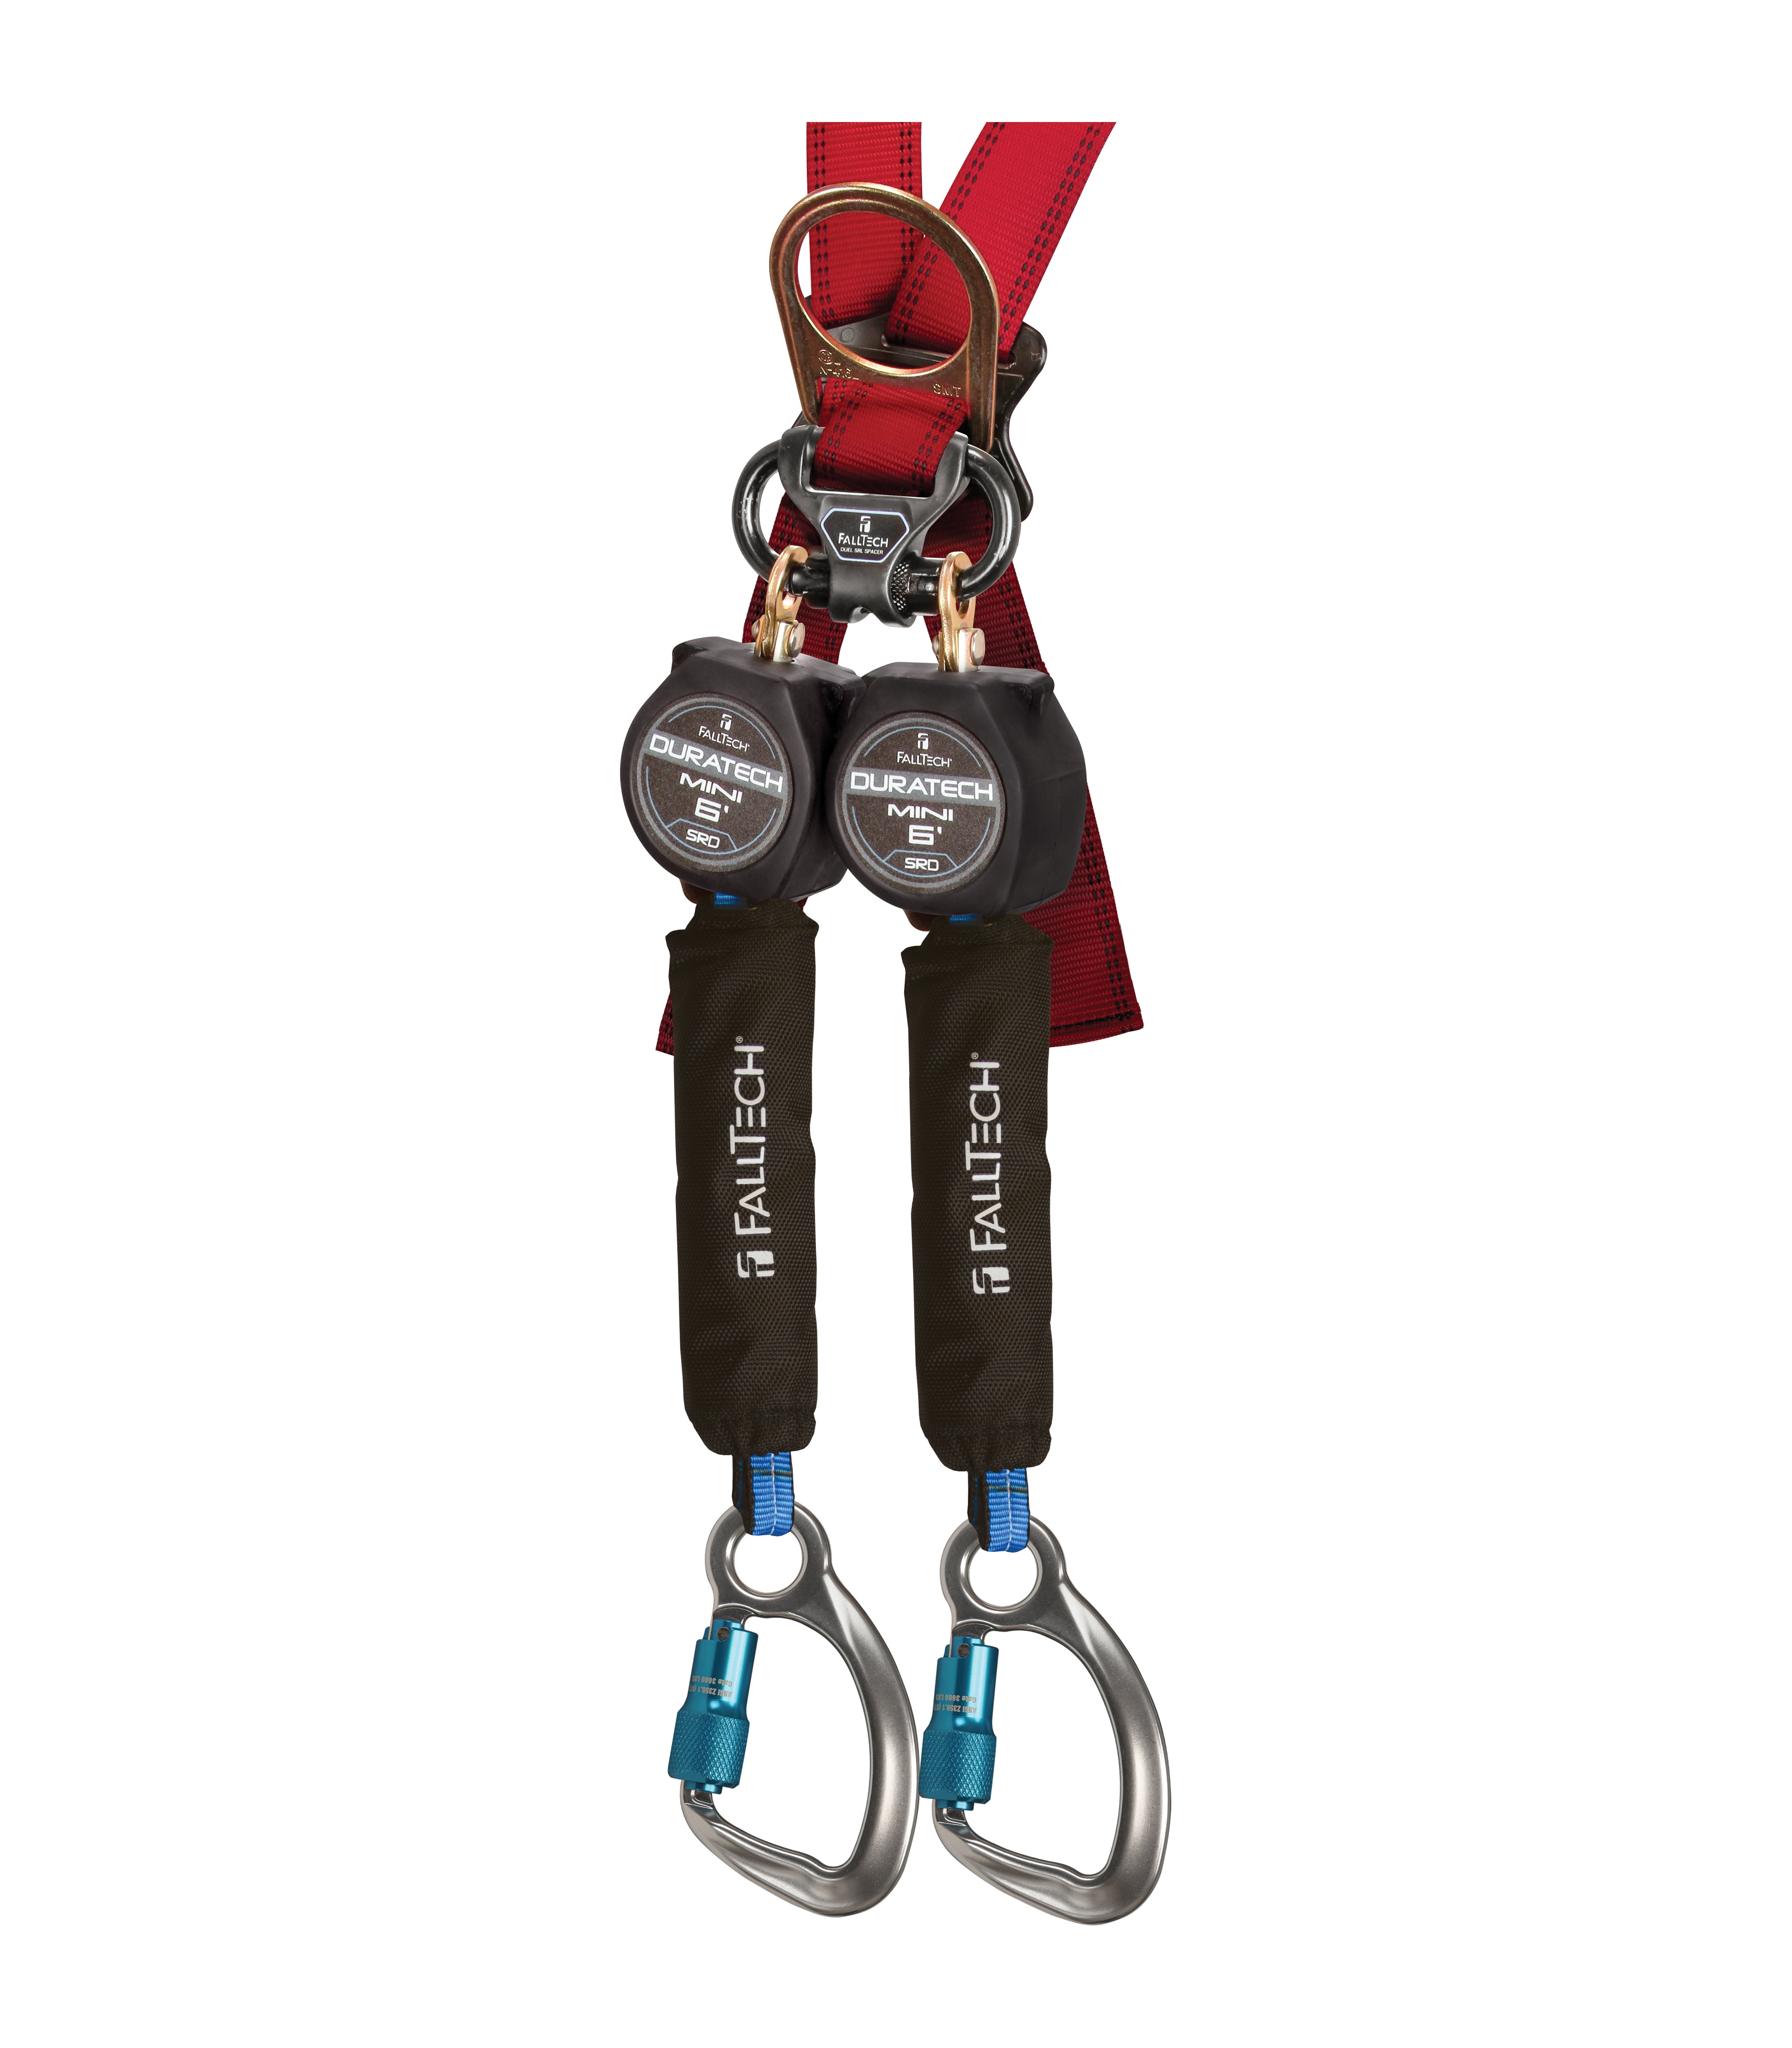 FallTech DuraTech 6' Mini SRL Twin-Leg with Aluminum Carabiners from Columbia Safety